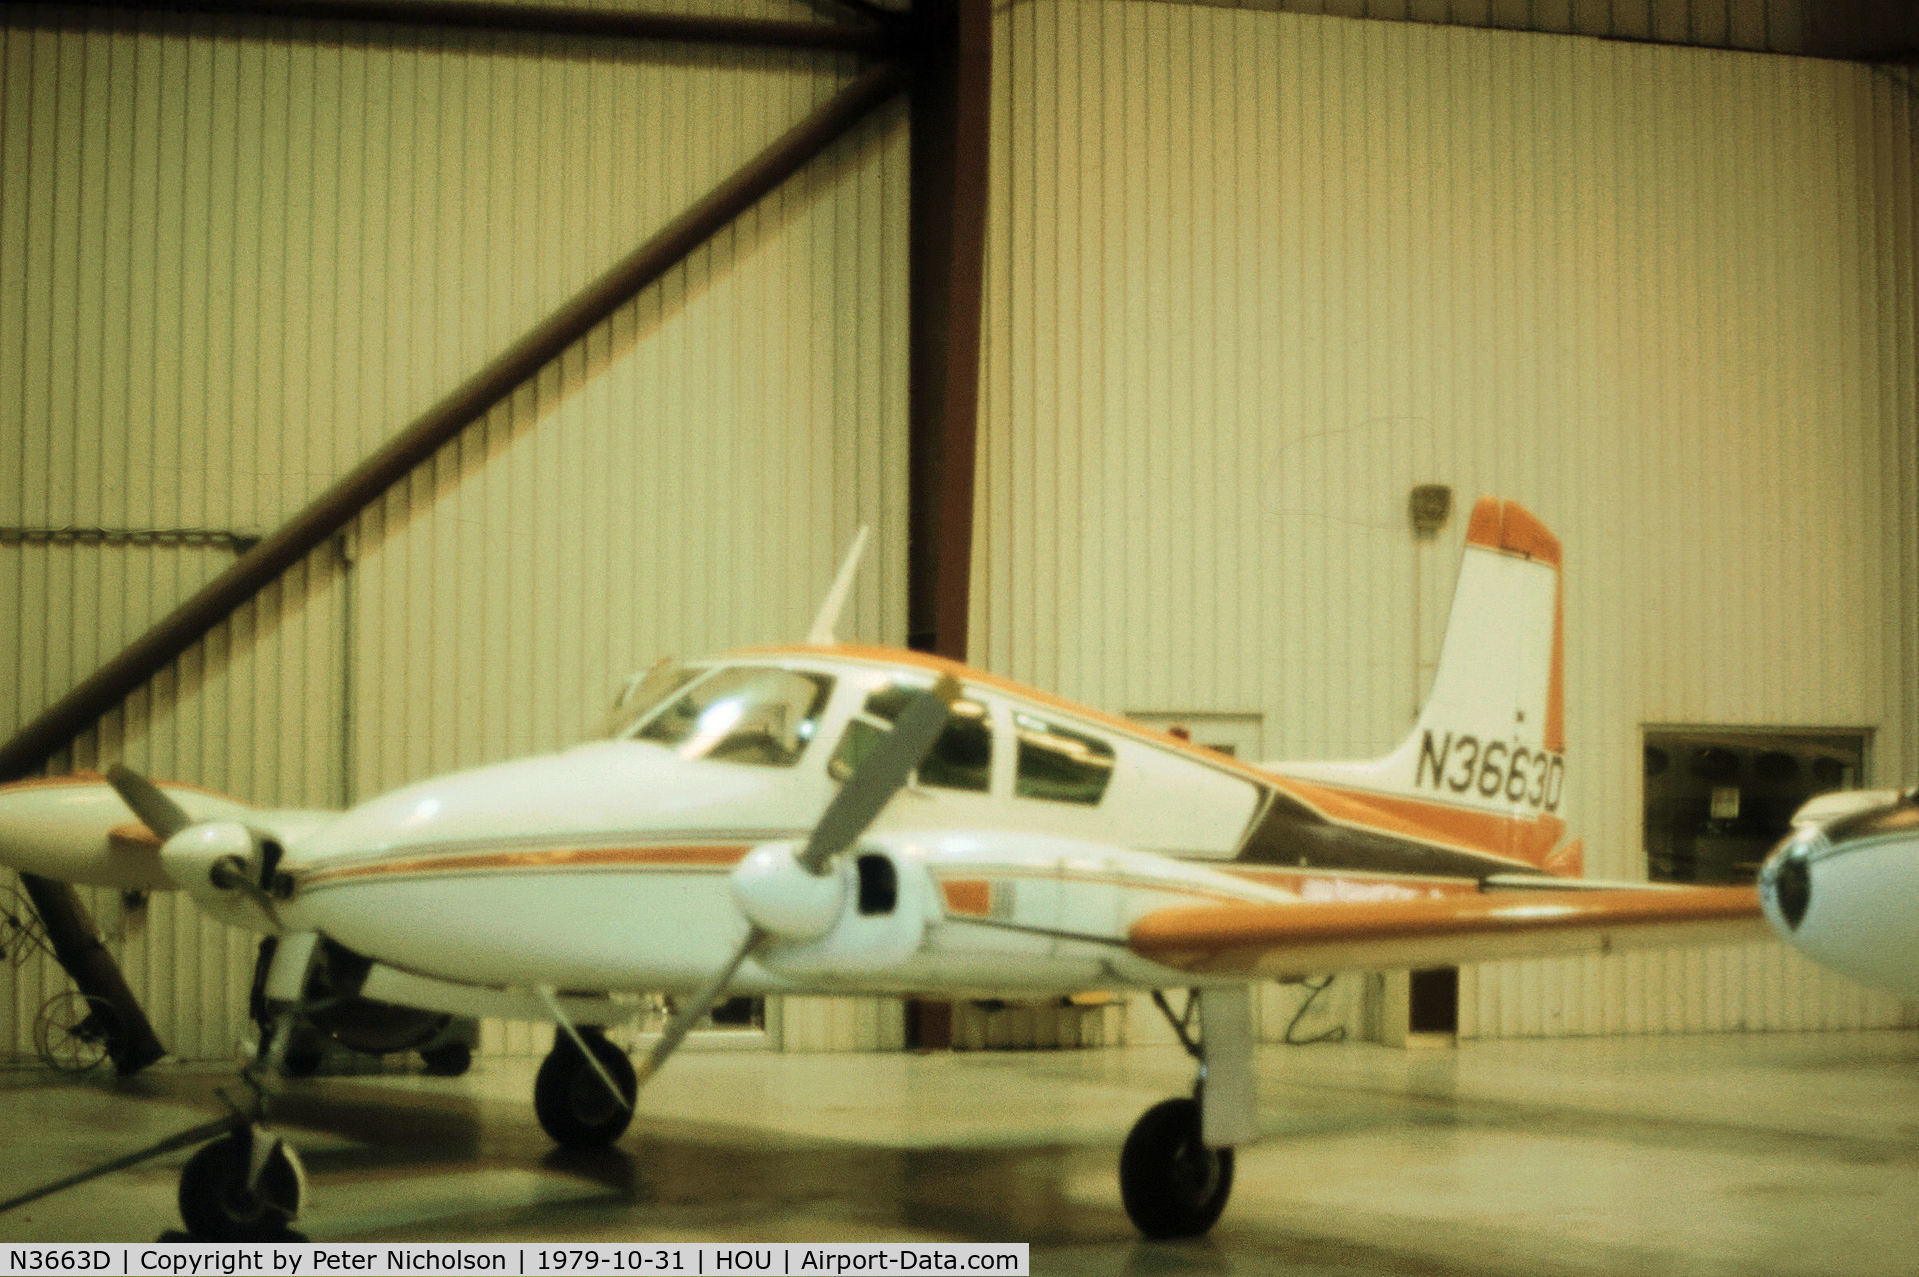 N3663D, Cessna 310 C/N 35363, Cessna 310 as seen at Houston Hobby Airport in October 1979.